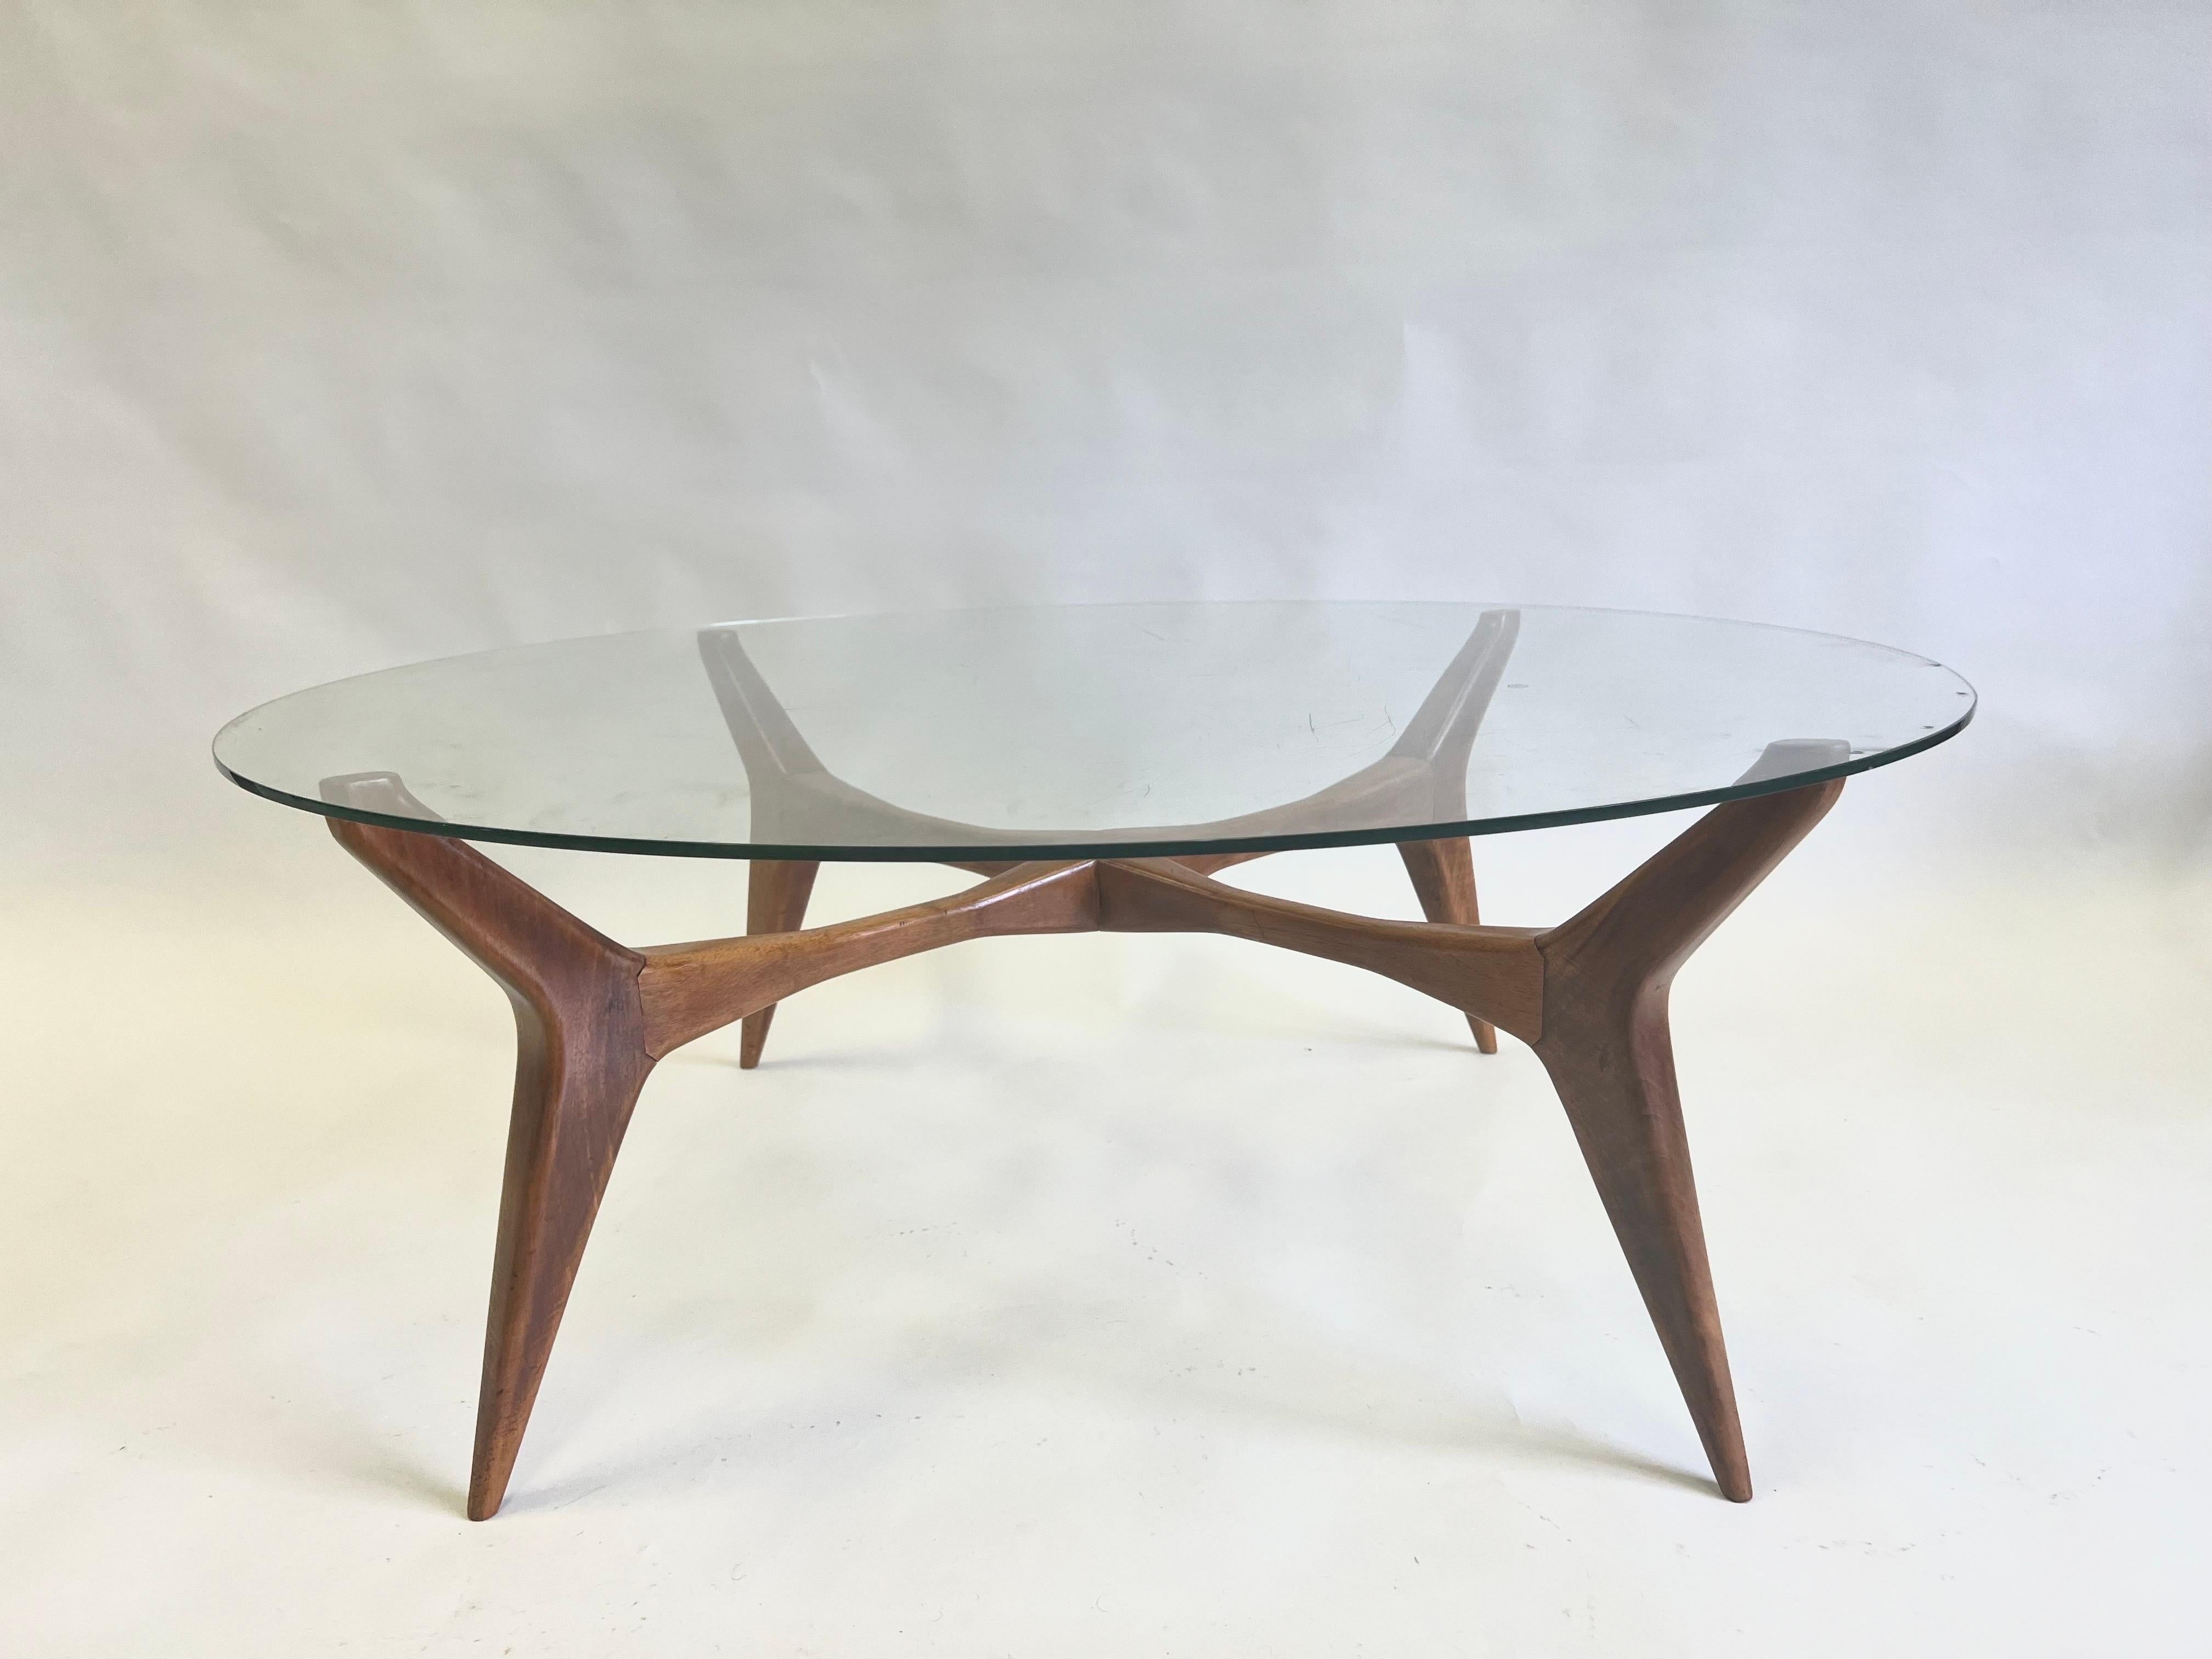 A rare and iconic Italian Mid-Century Modern Round Cocktail Table in Solid Walnut by the Italian master architect and designer Gio Ponti. The piece presents an original and bold design of 4 deeply angled and deeply tapered legs with deeply angled